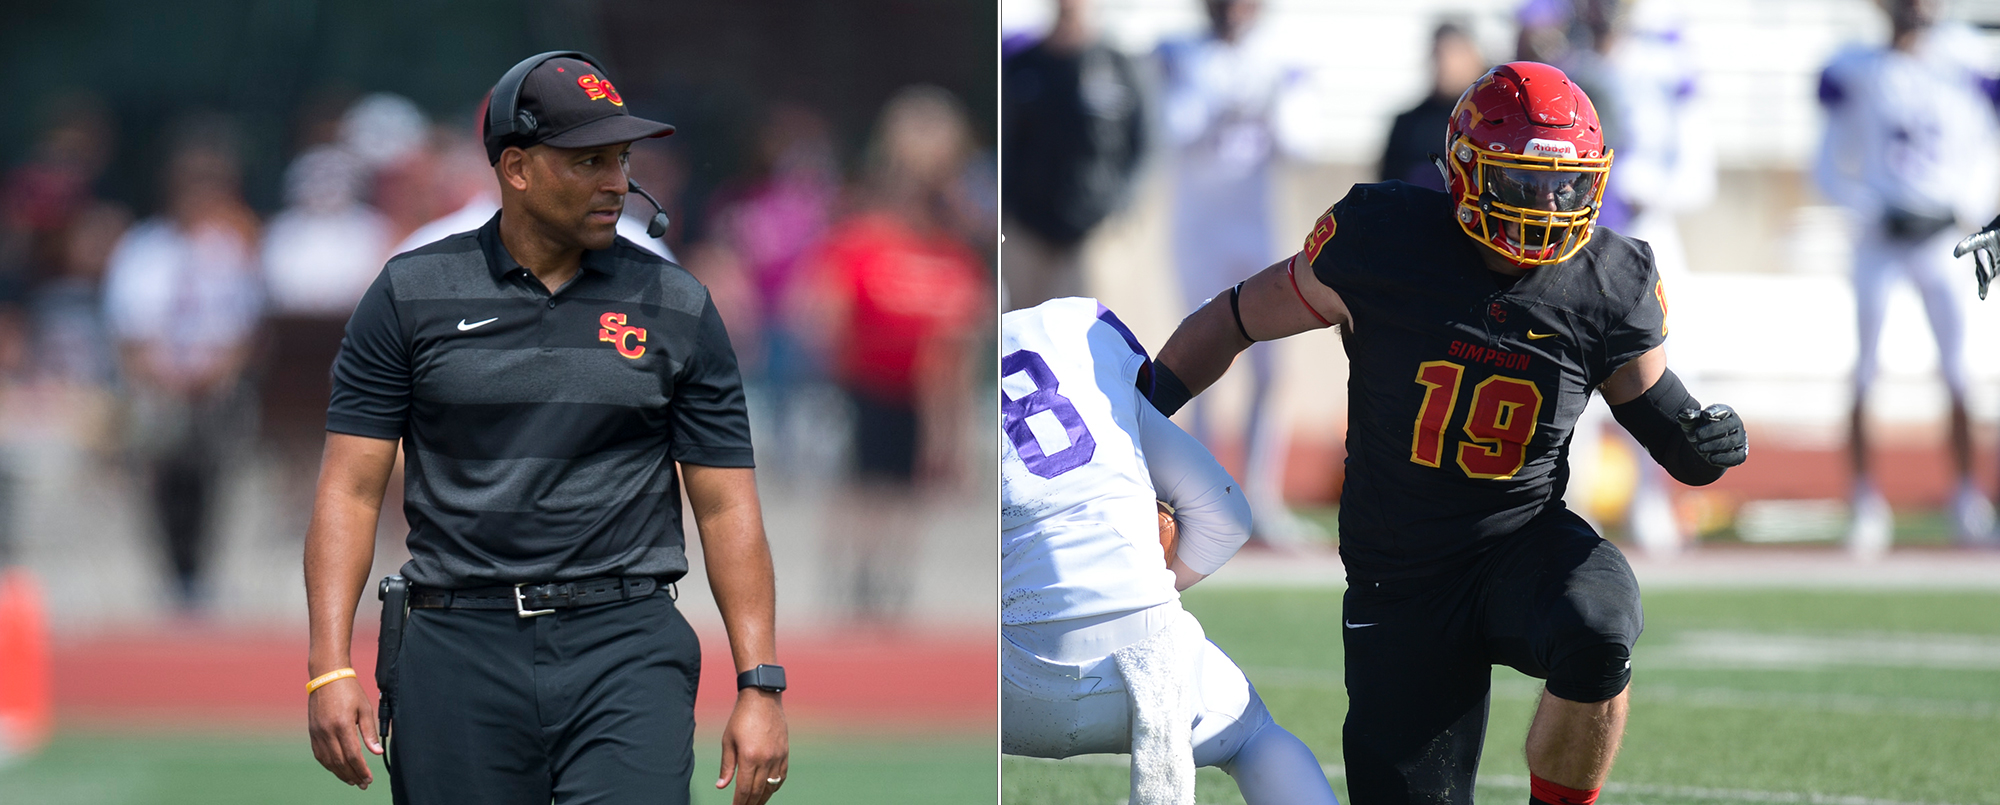 Head coach Matt Jeter (left) earned American Rivers Coach of the Year honors and linebacker Michael Connor was named Defensive Player of the Year for the 2018 season.